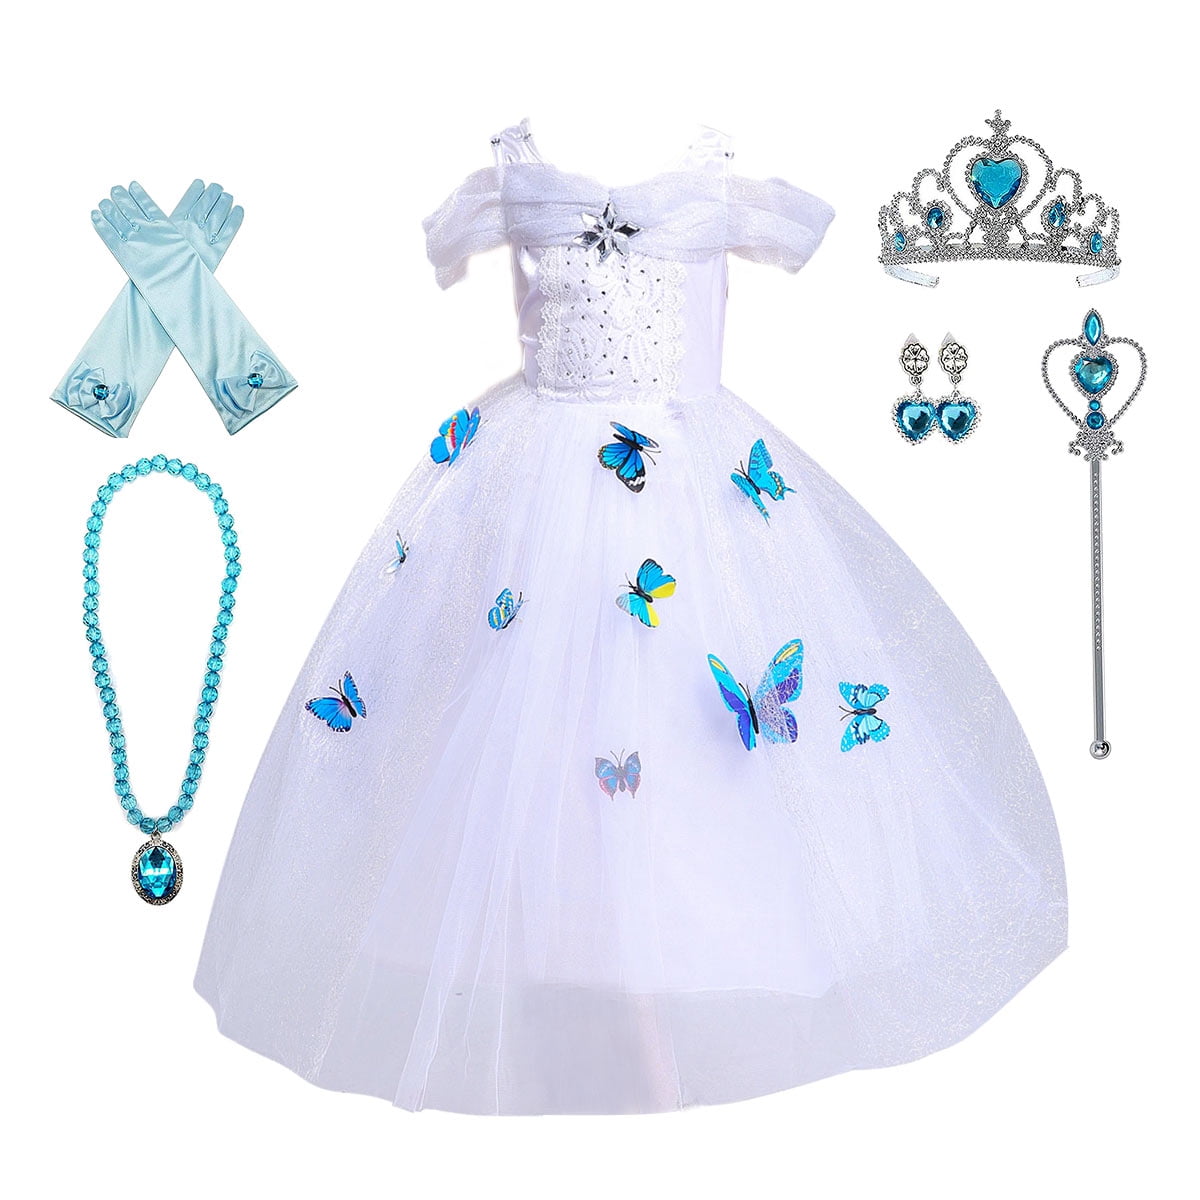 White w/tiered layers Girl's Fancy Costume Princess Dress size 4-5 